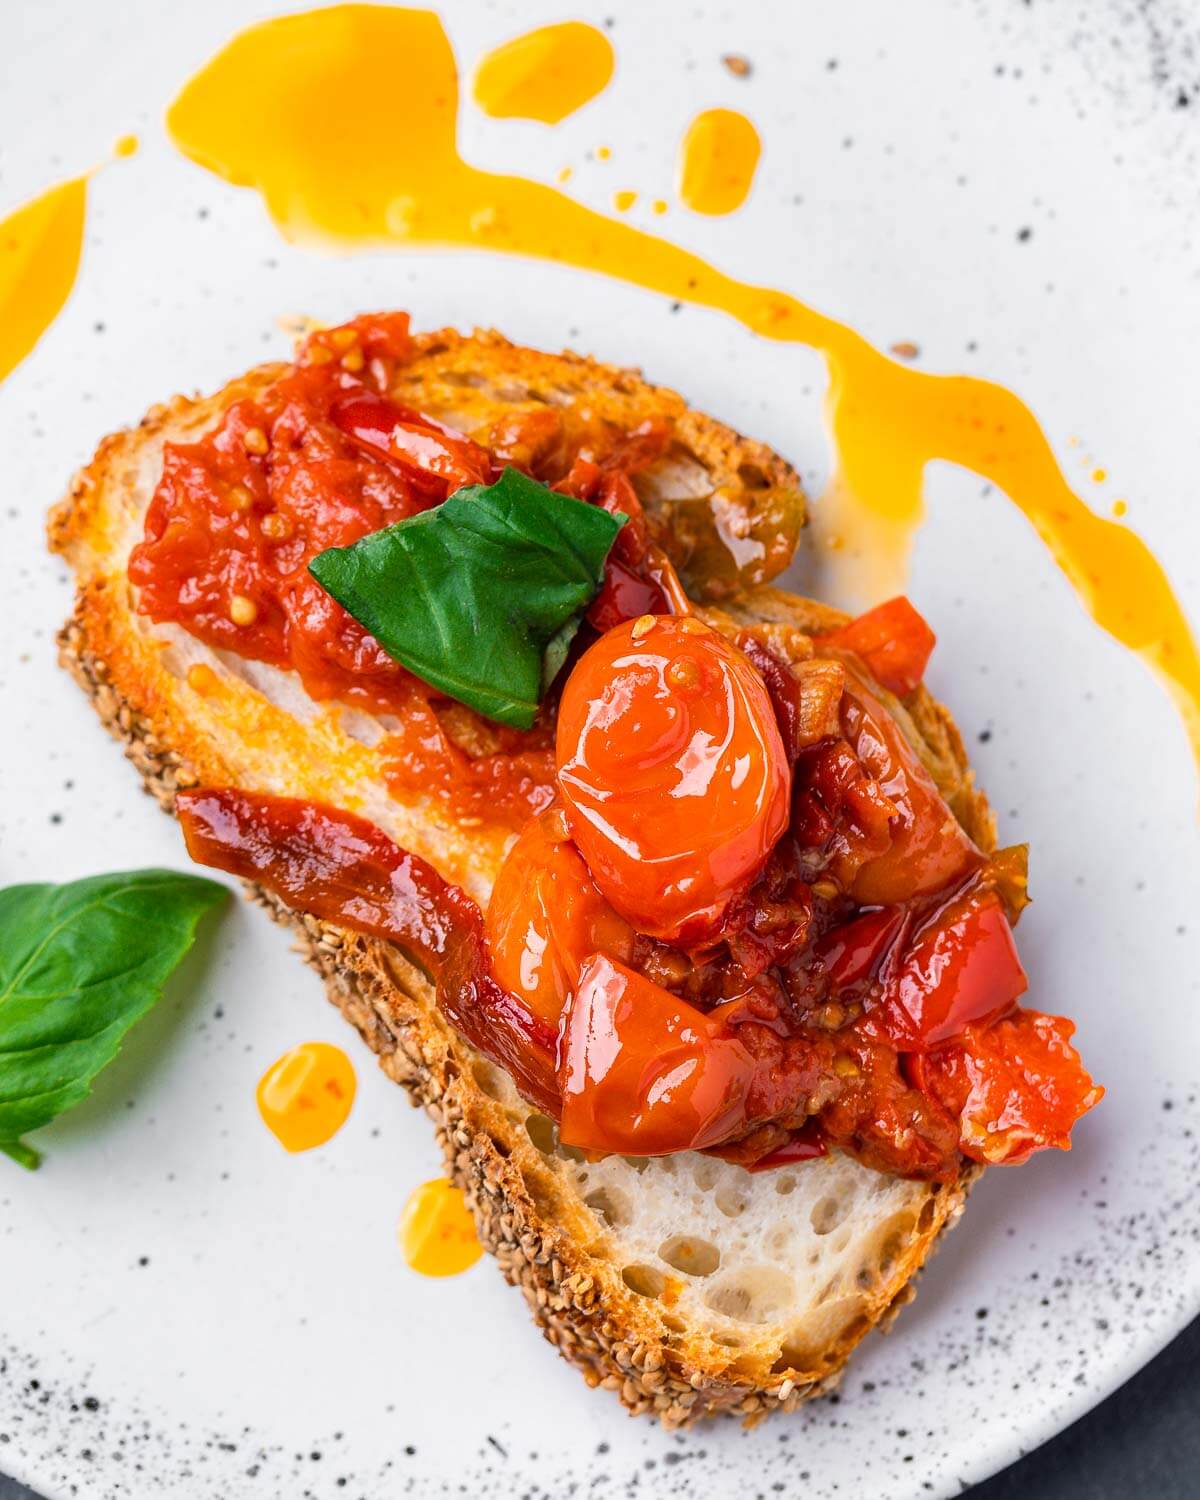 Cherry pepper spread on toasted Italian bread in white plate.